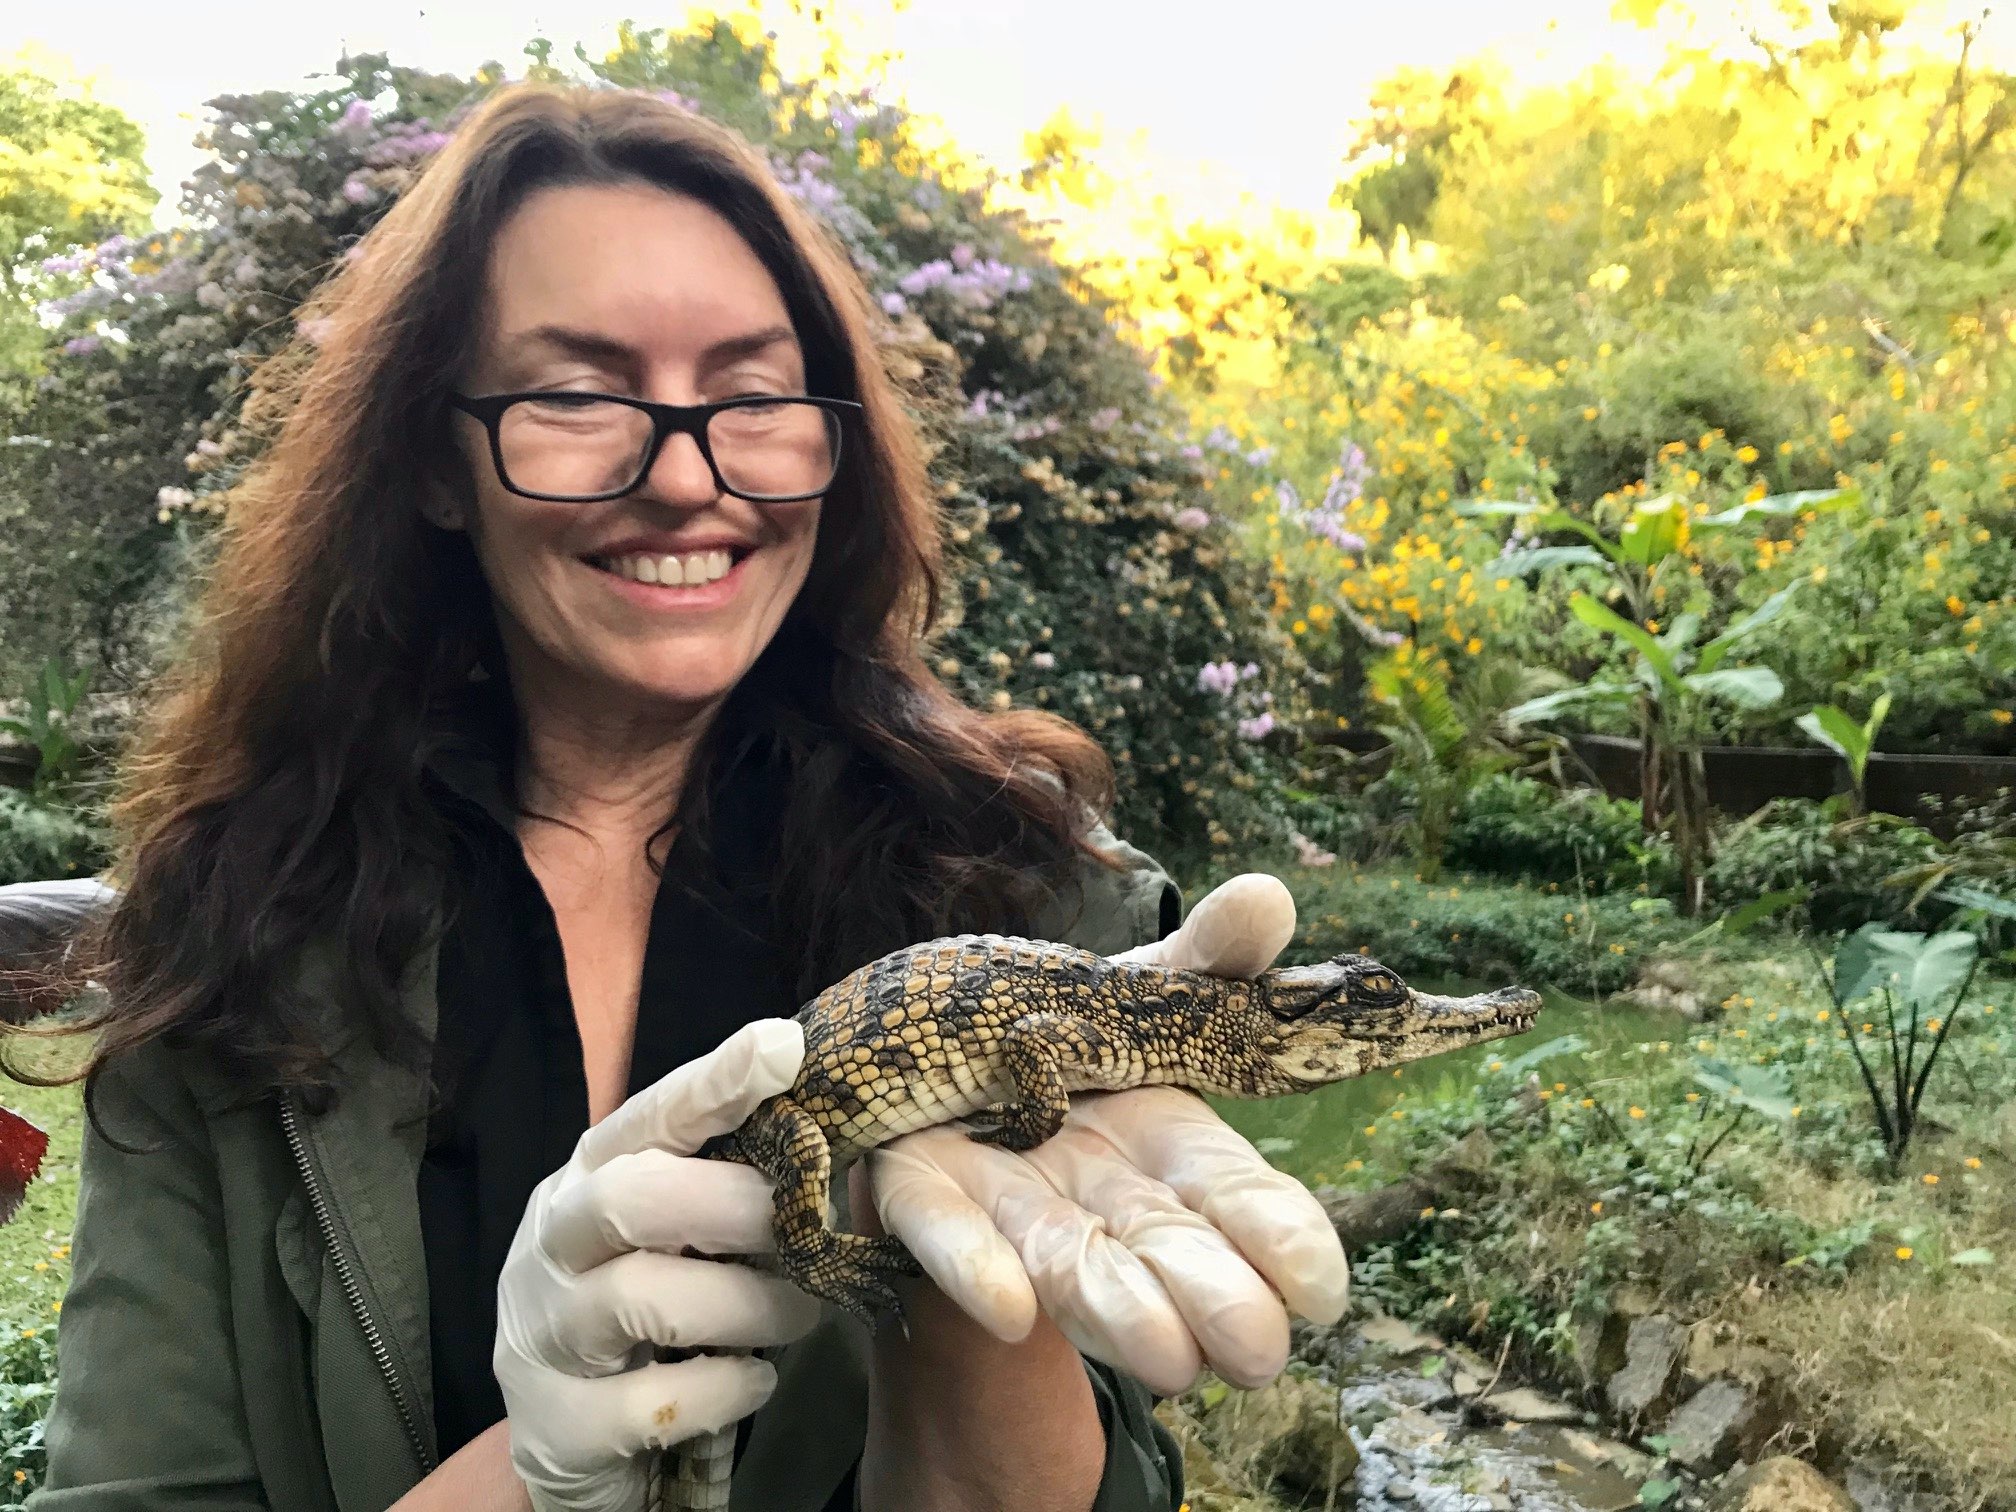 Evon Hekkala holds a baby crocodile horizontally in gloved hands. She's smiling and wearing black glasses. In the background there are lush trees and flowers.